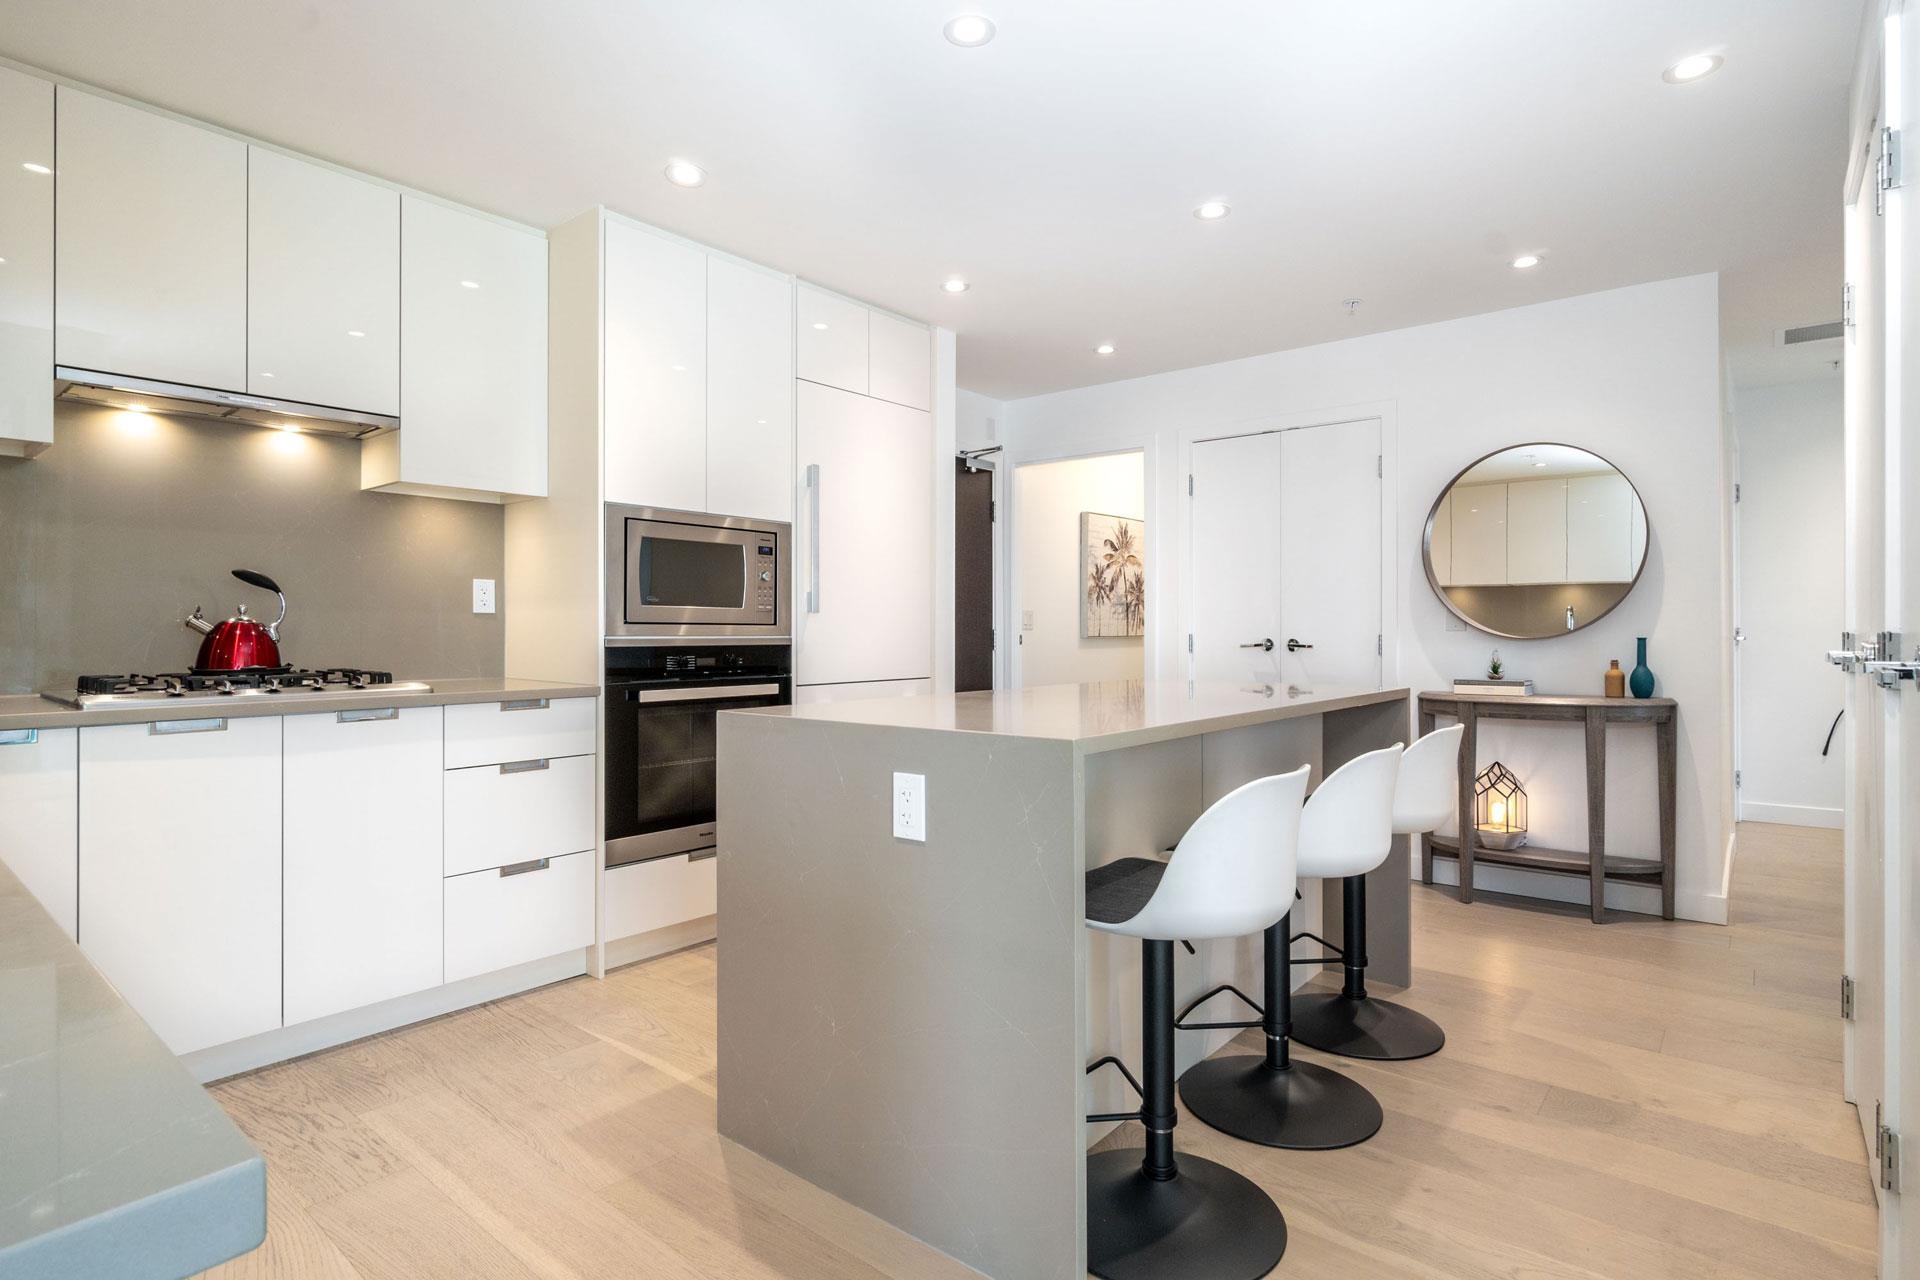 Listing image of 701 6328 CAMBIE STREET